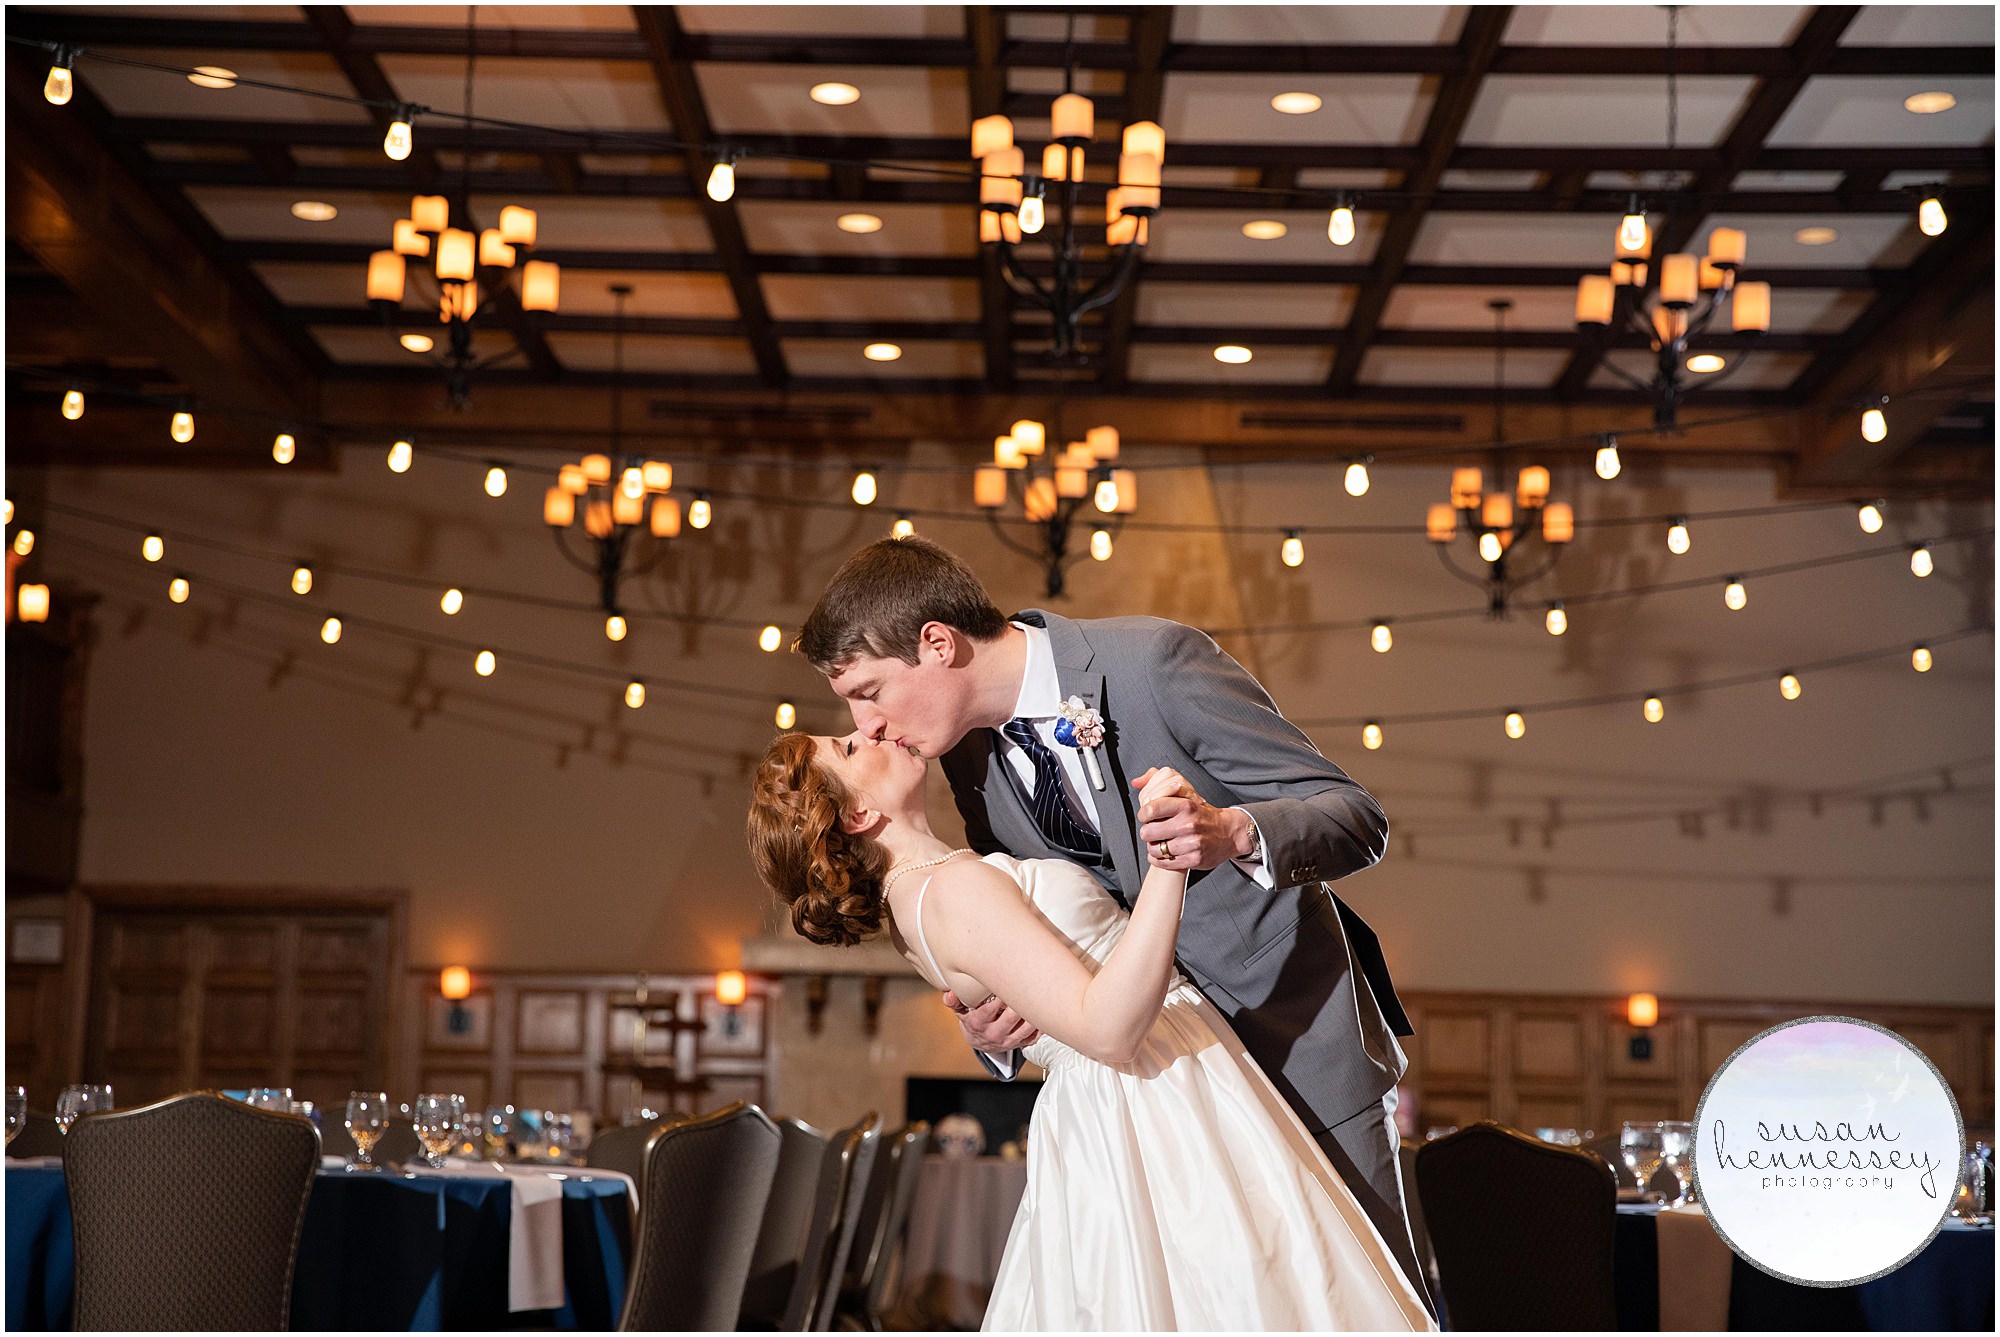 A winter wedding at he Moorestown Community House